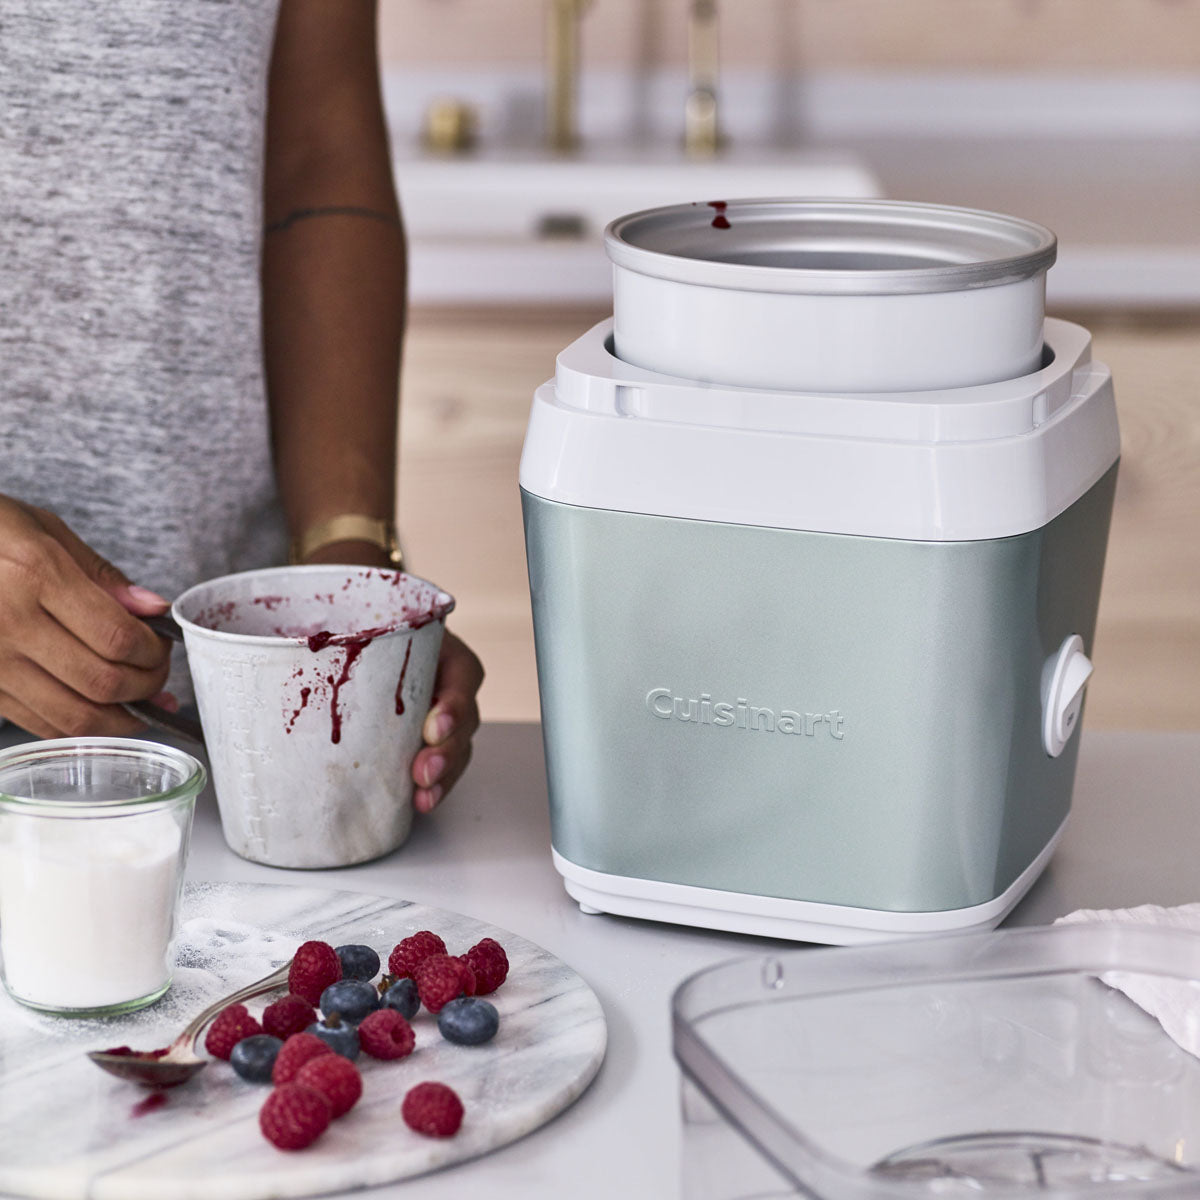 Cuisinart Style Collection Ice Cream and Dessert Maker